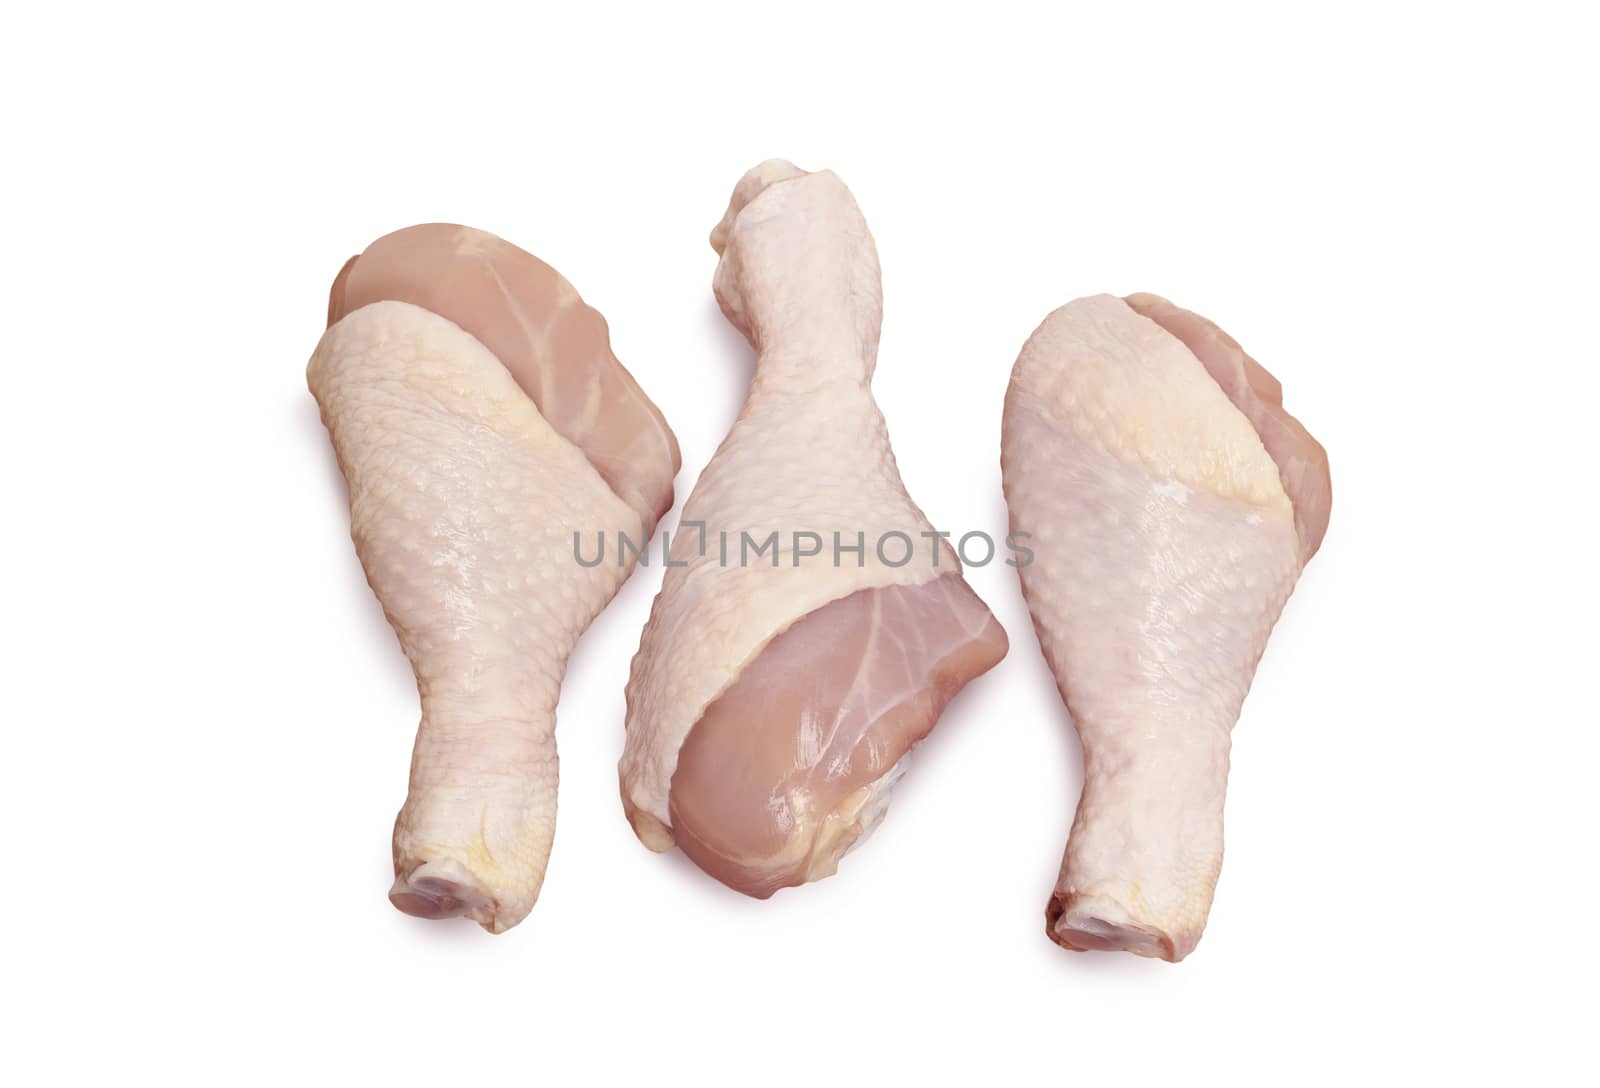 Raw Chicken meat isolated on white background. With clipping path